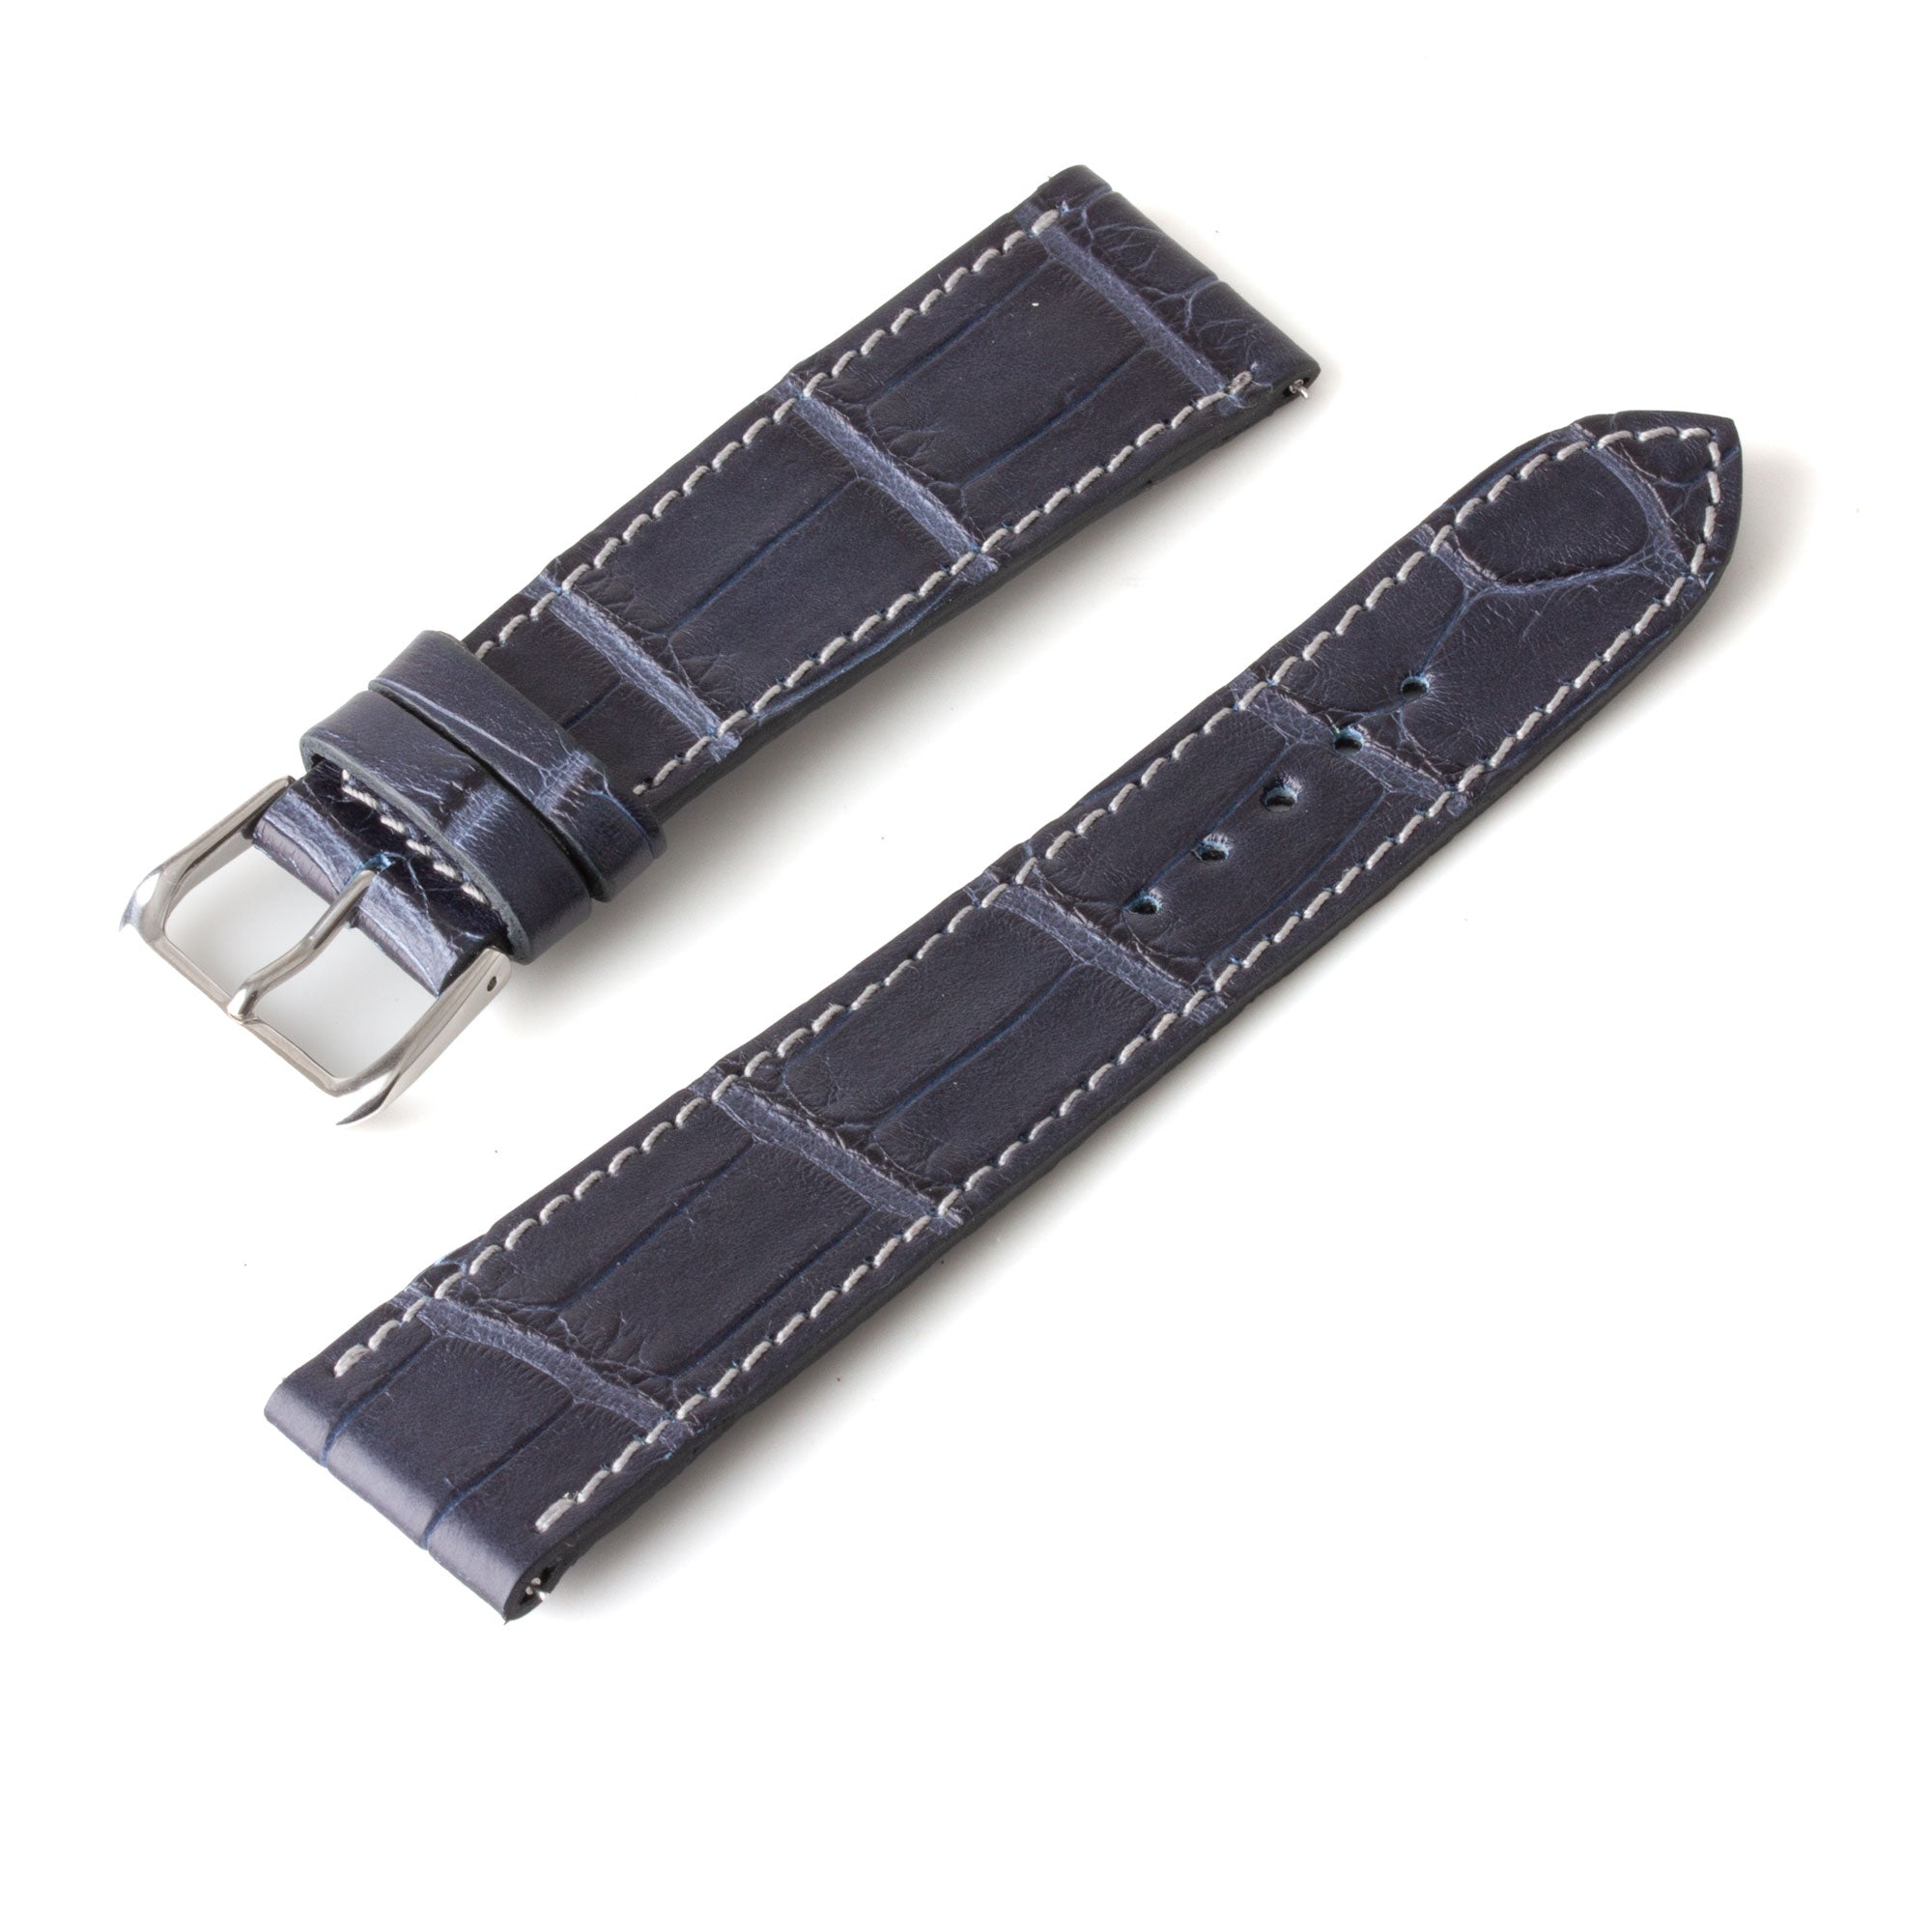 Alligator "Solo" leather watch band - 22mm width (0.87 inches) / Size M (n° 3)